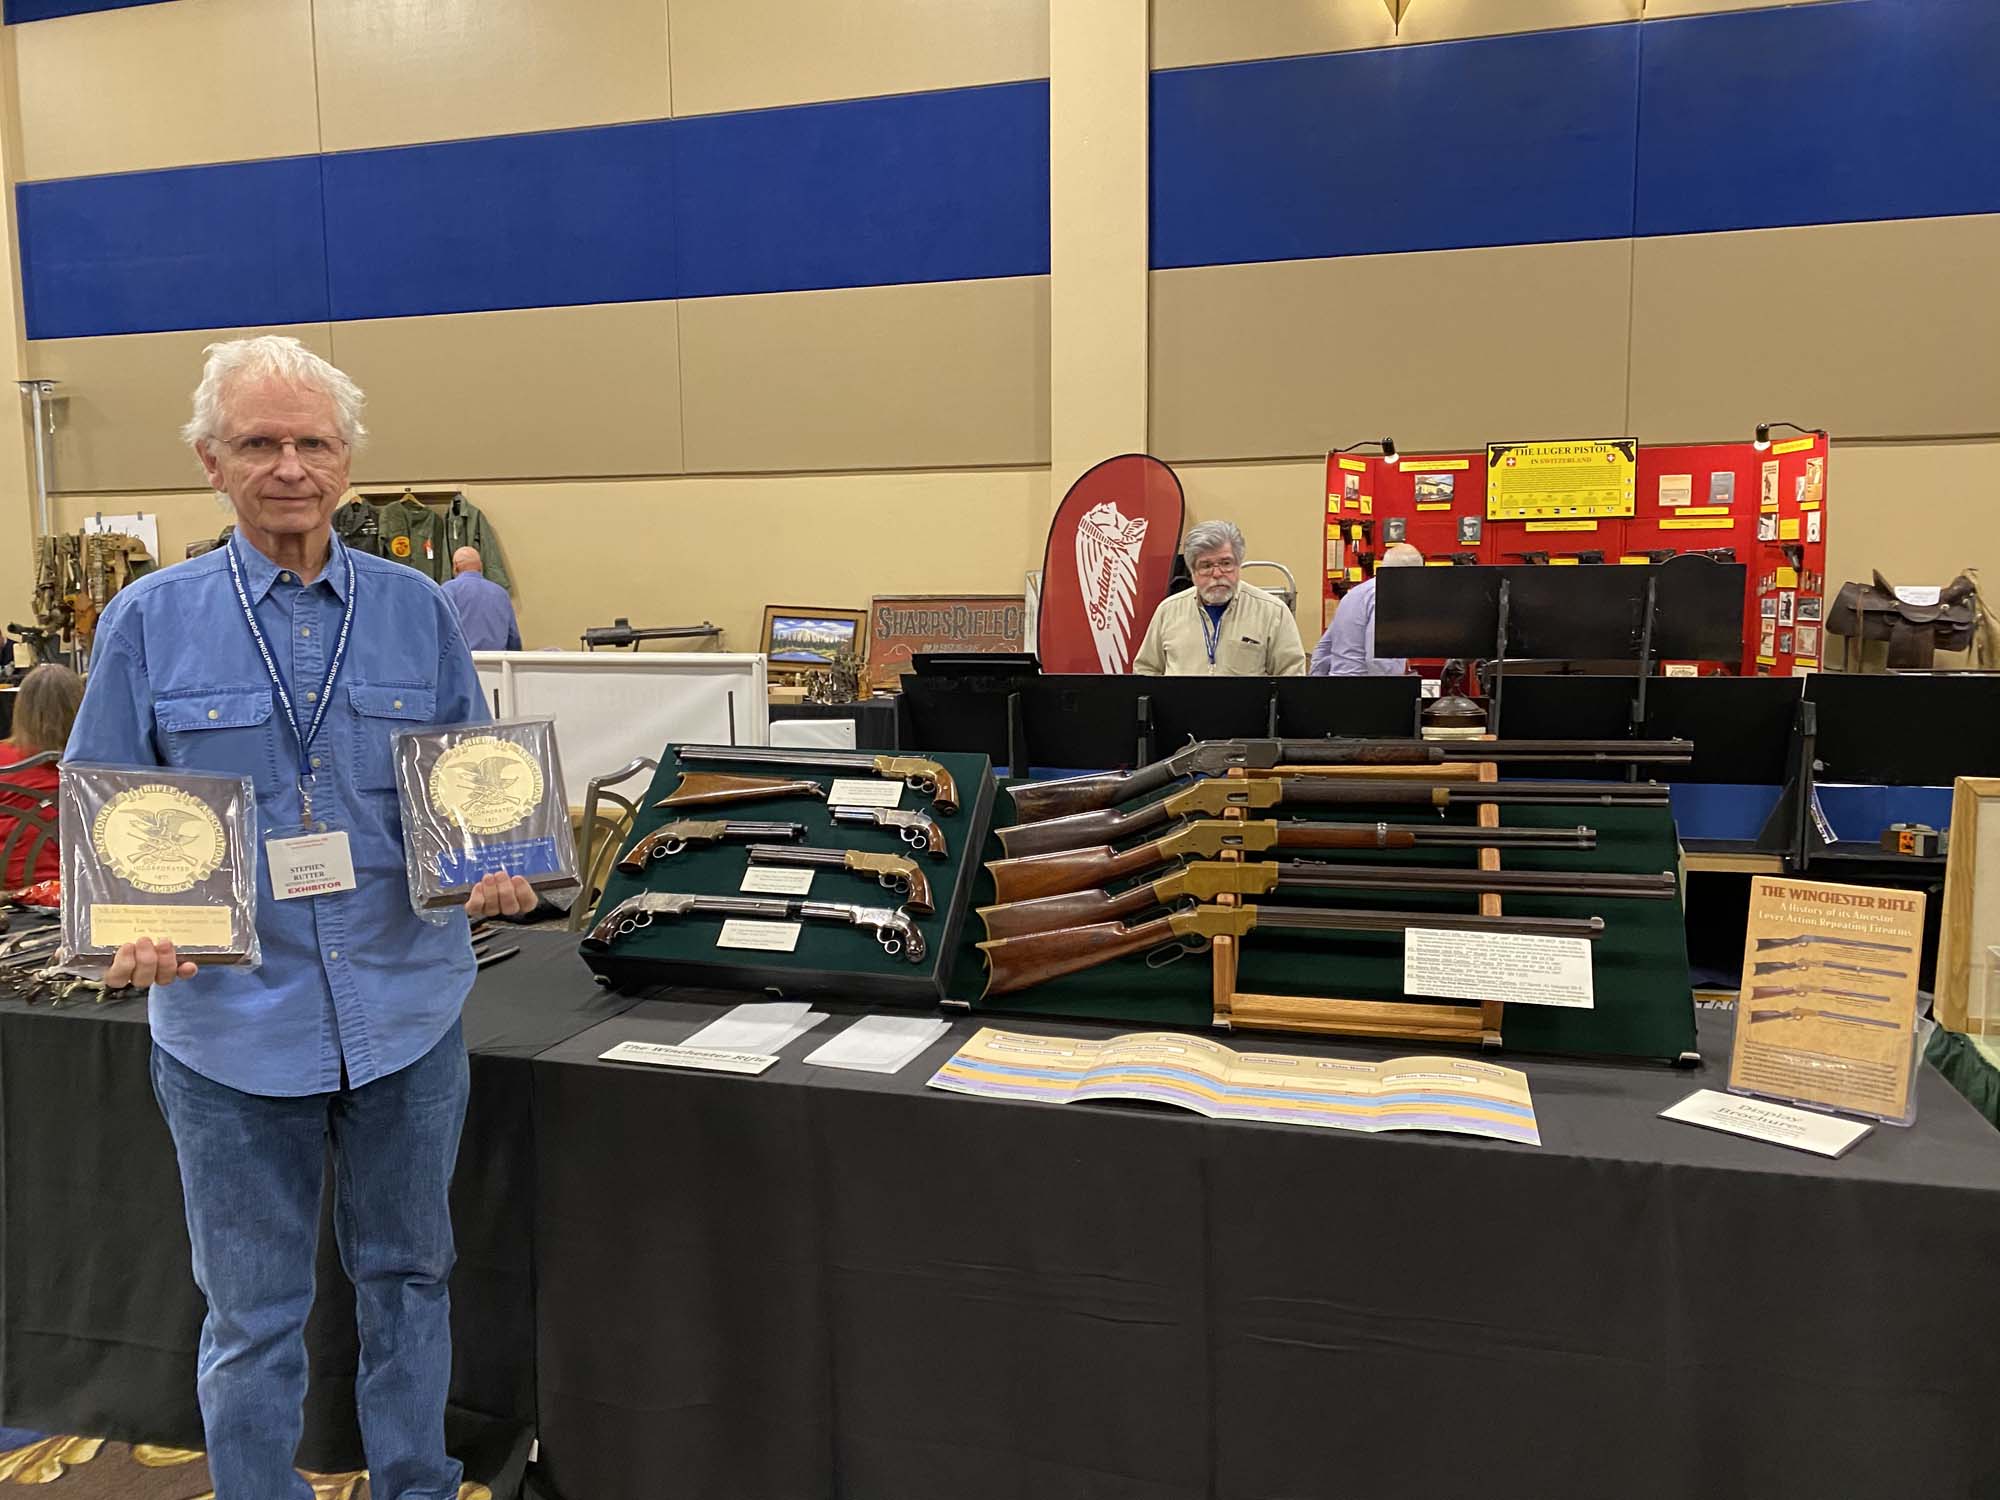 25th Annual NRA National Gun Collectors Show Awards - Stephen Rutter - Antique Arms Outstanding Exhibit Award